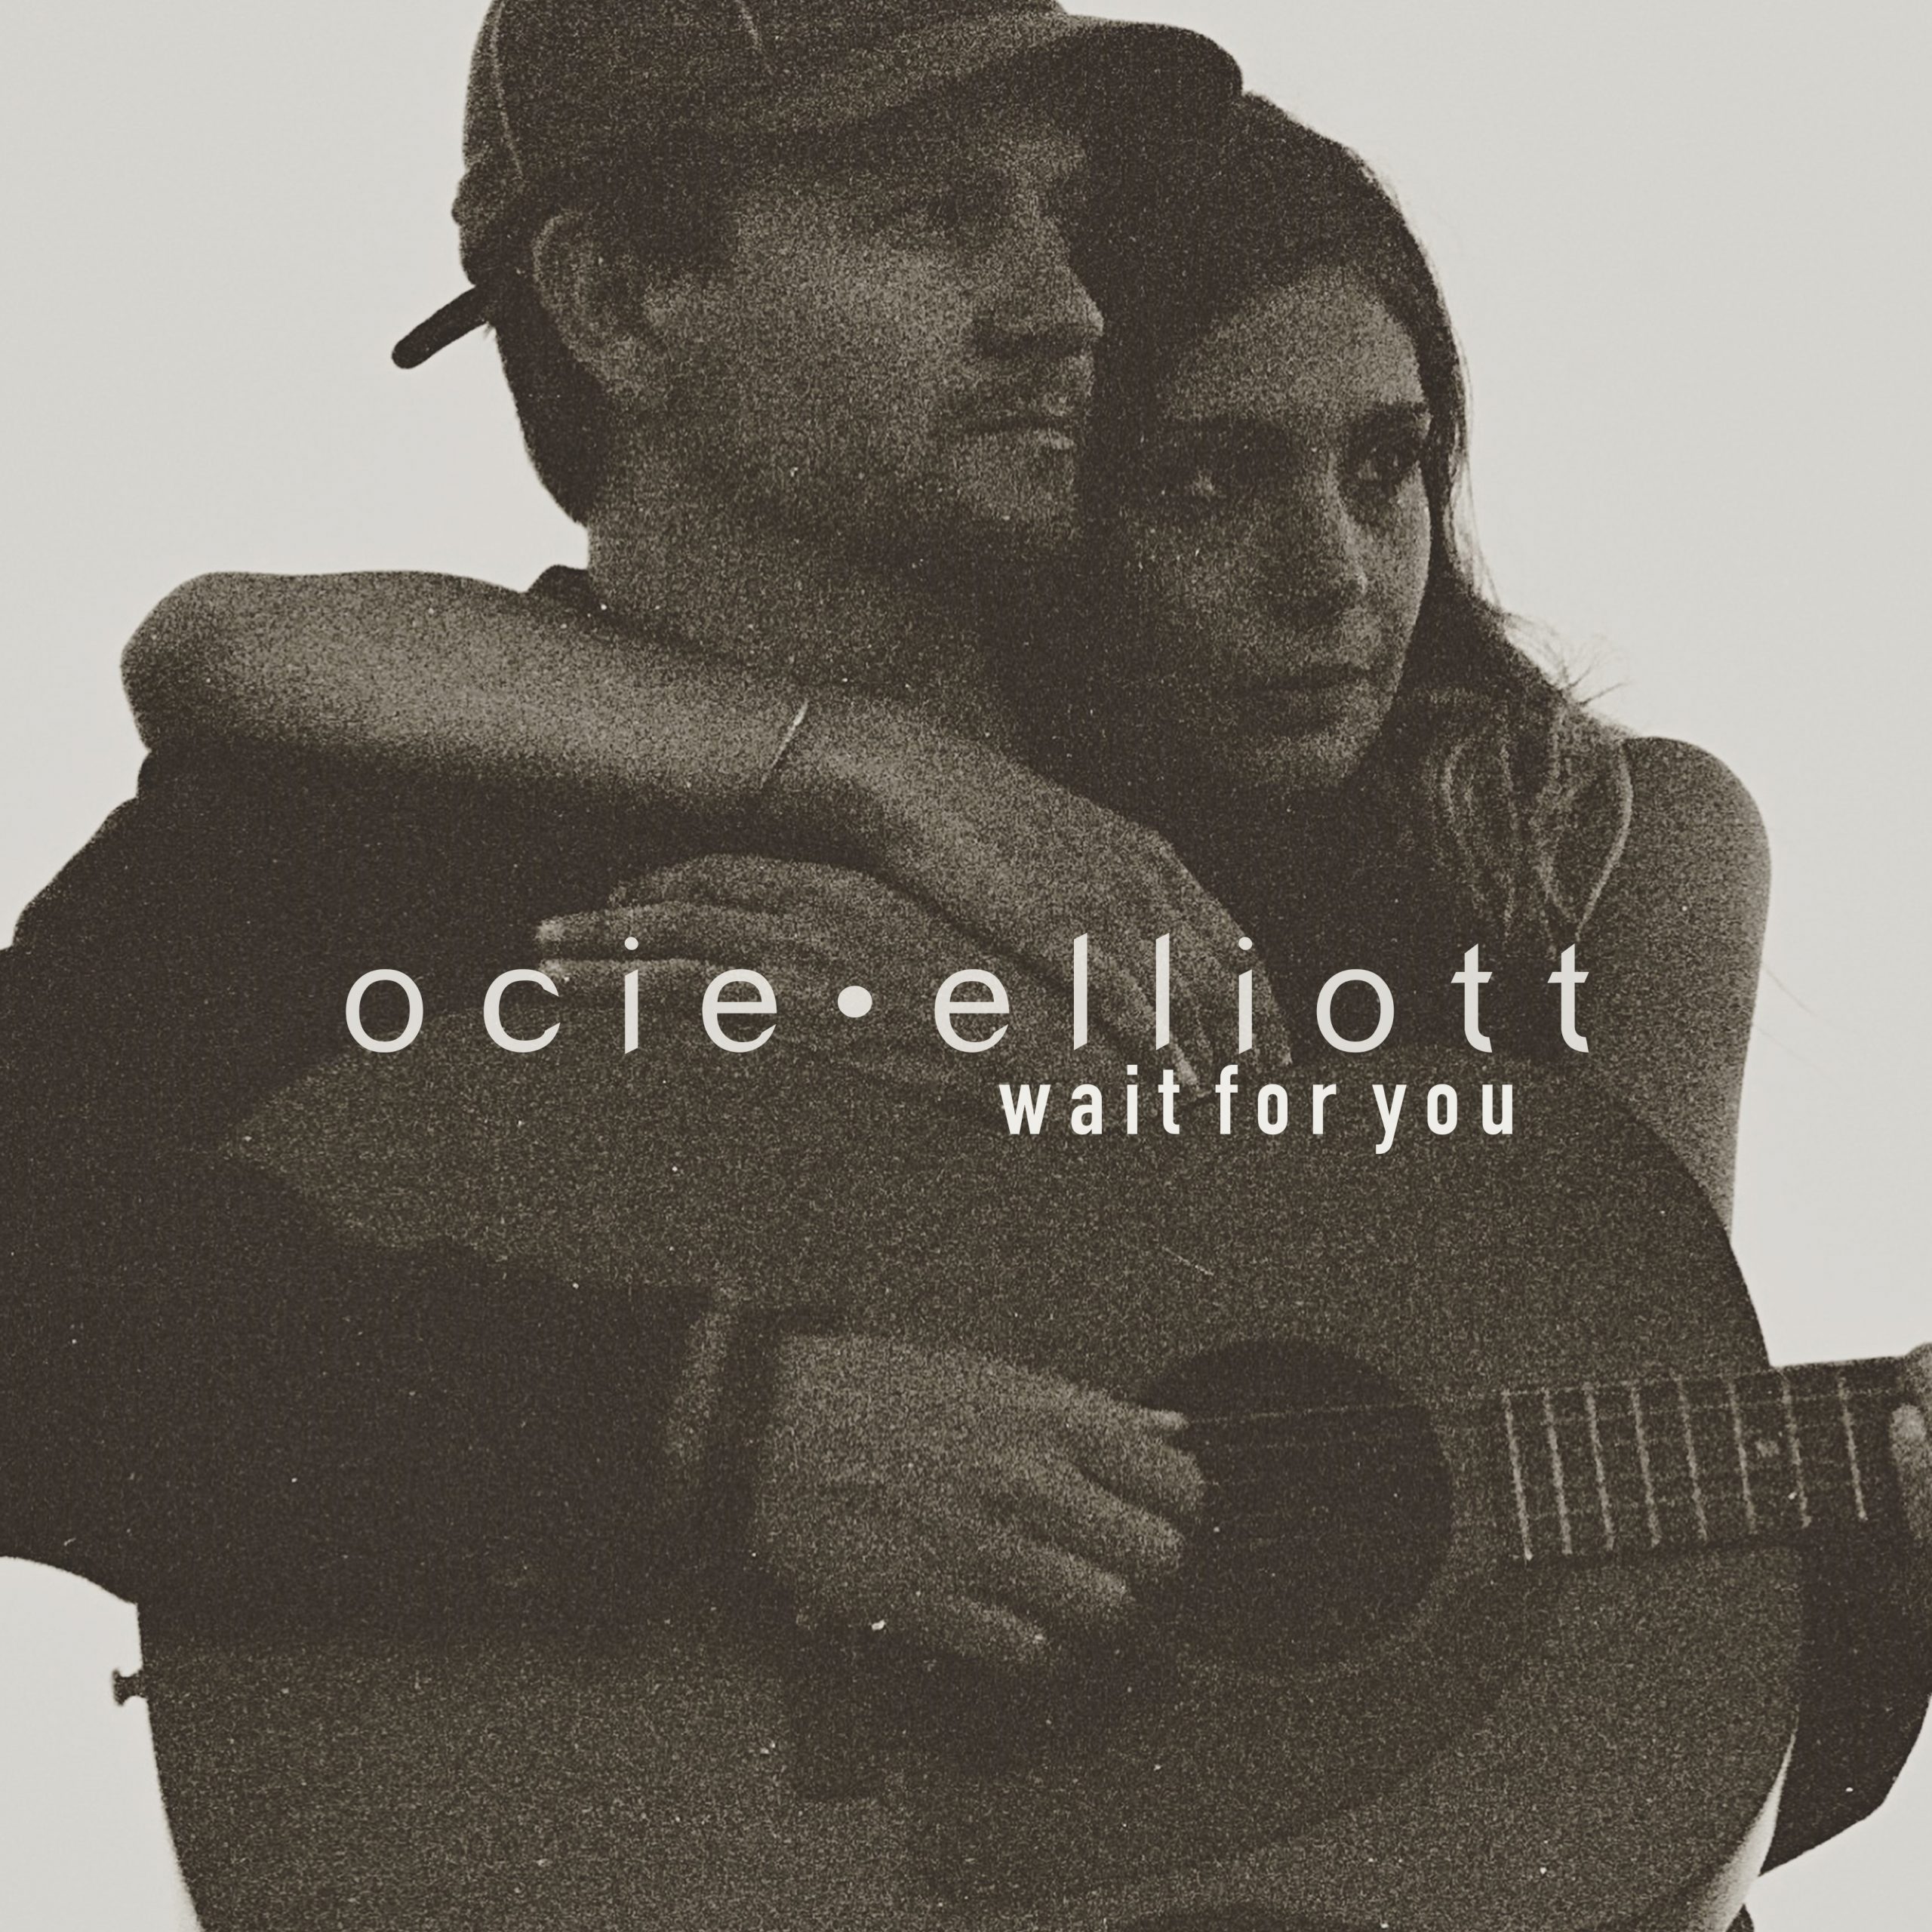 Ocie Elliott Shared Tender Song "Wait For You" From EP 'A